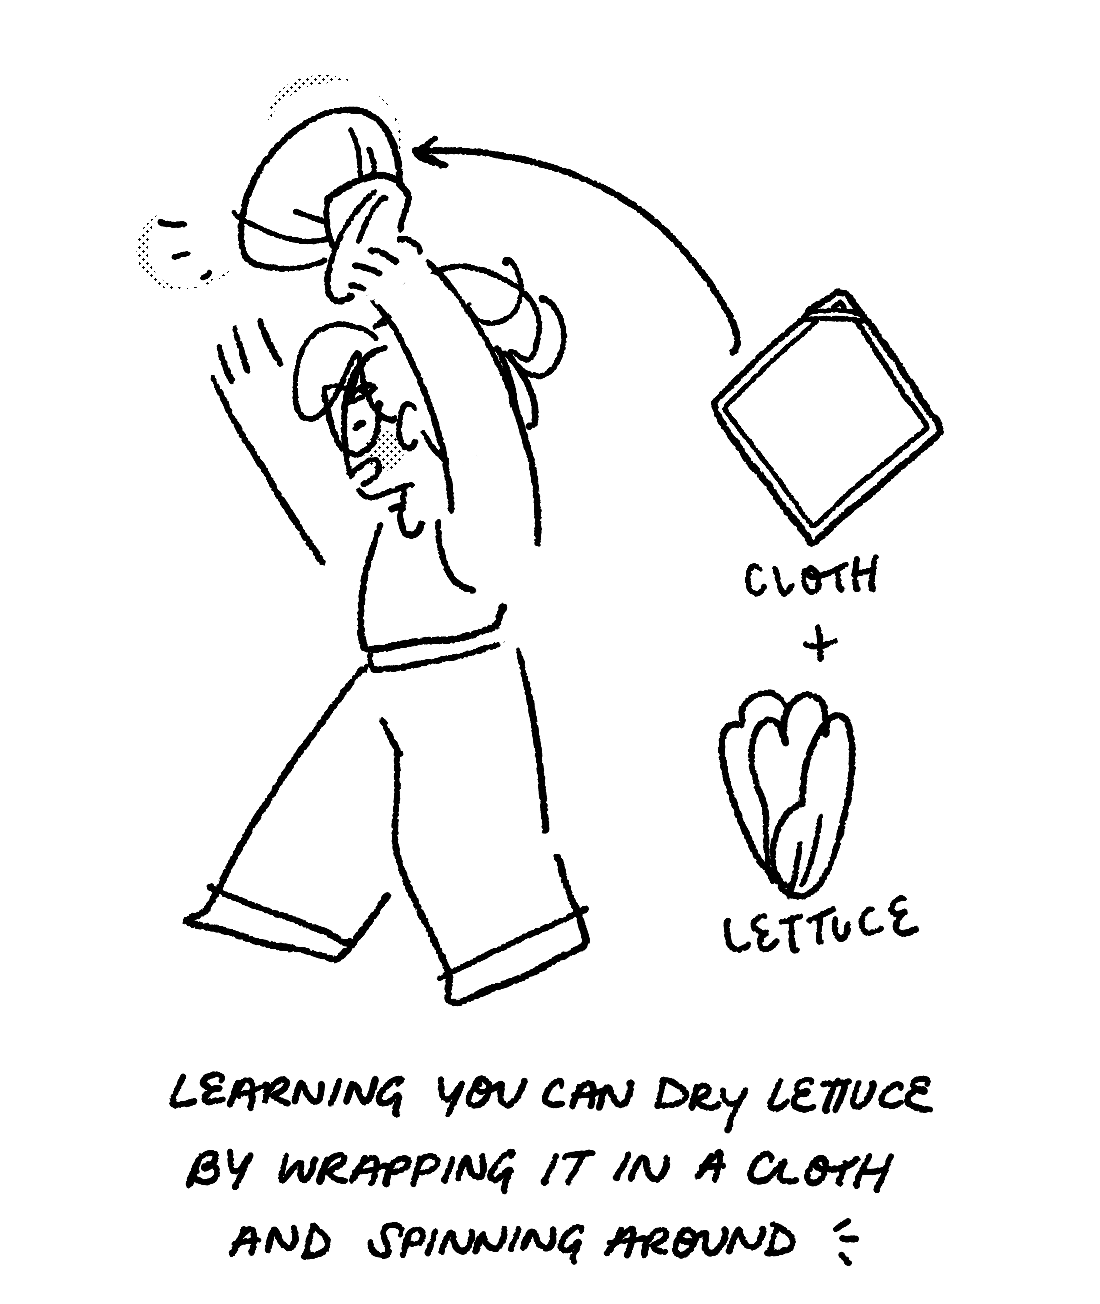 7. drawing of me with my hands in the air, turning left, smiling. my hair is in a bun and i’m wearing a crop top and baggy pants. i’m holding a bundle in my left hand, and spinning marks exude from it. an arrow points to the bag and leads to images of a diamond shaped cloth and a bundle of lettuce. beneath each image text reads “cloth + lettuce”. text below the entire image says: “learning you can dry lettuce by wrapping it in a cloth and spinning around” with three excitement marks to the right of the word “around”. the image is accented with halftones on my cheeks and around the bundle.